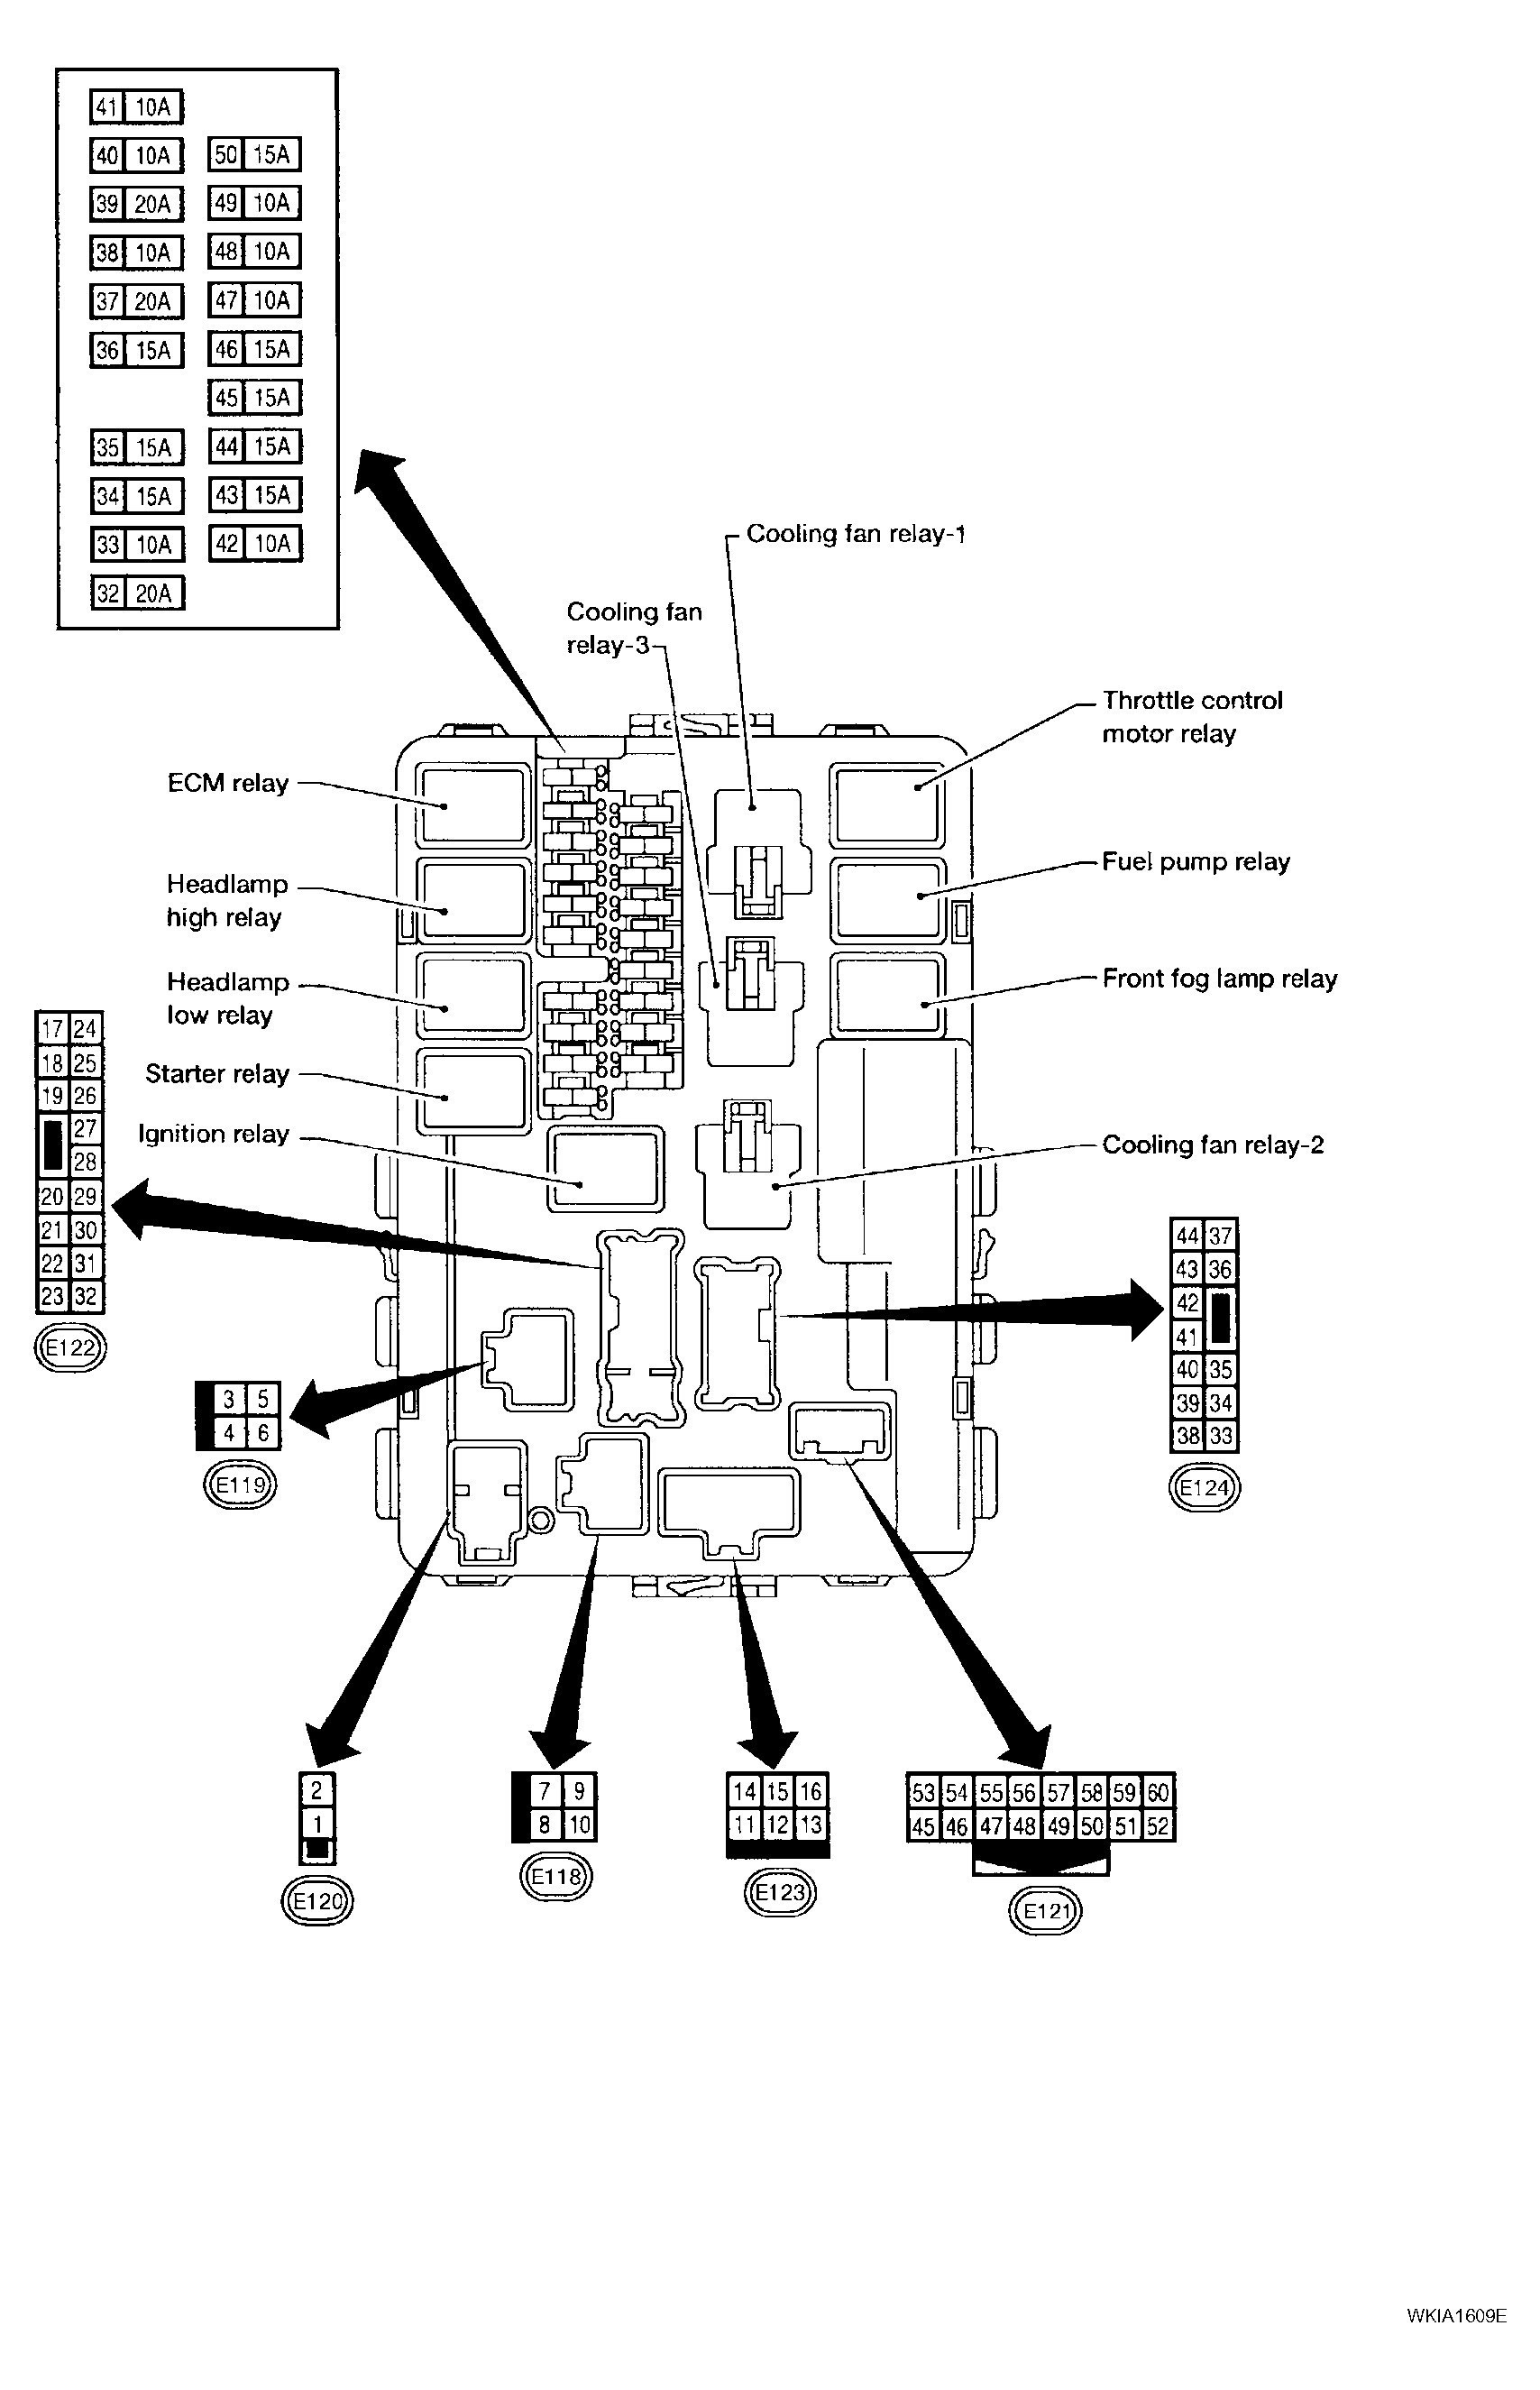 wiring diagram for 1999 nissan sentra wiring diagram paper 1999 nissan sentra wiring diagram wiring diagram